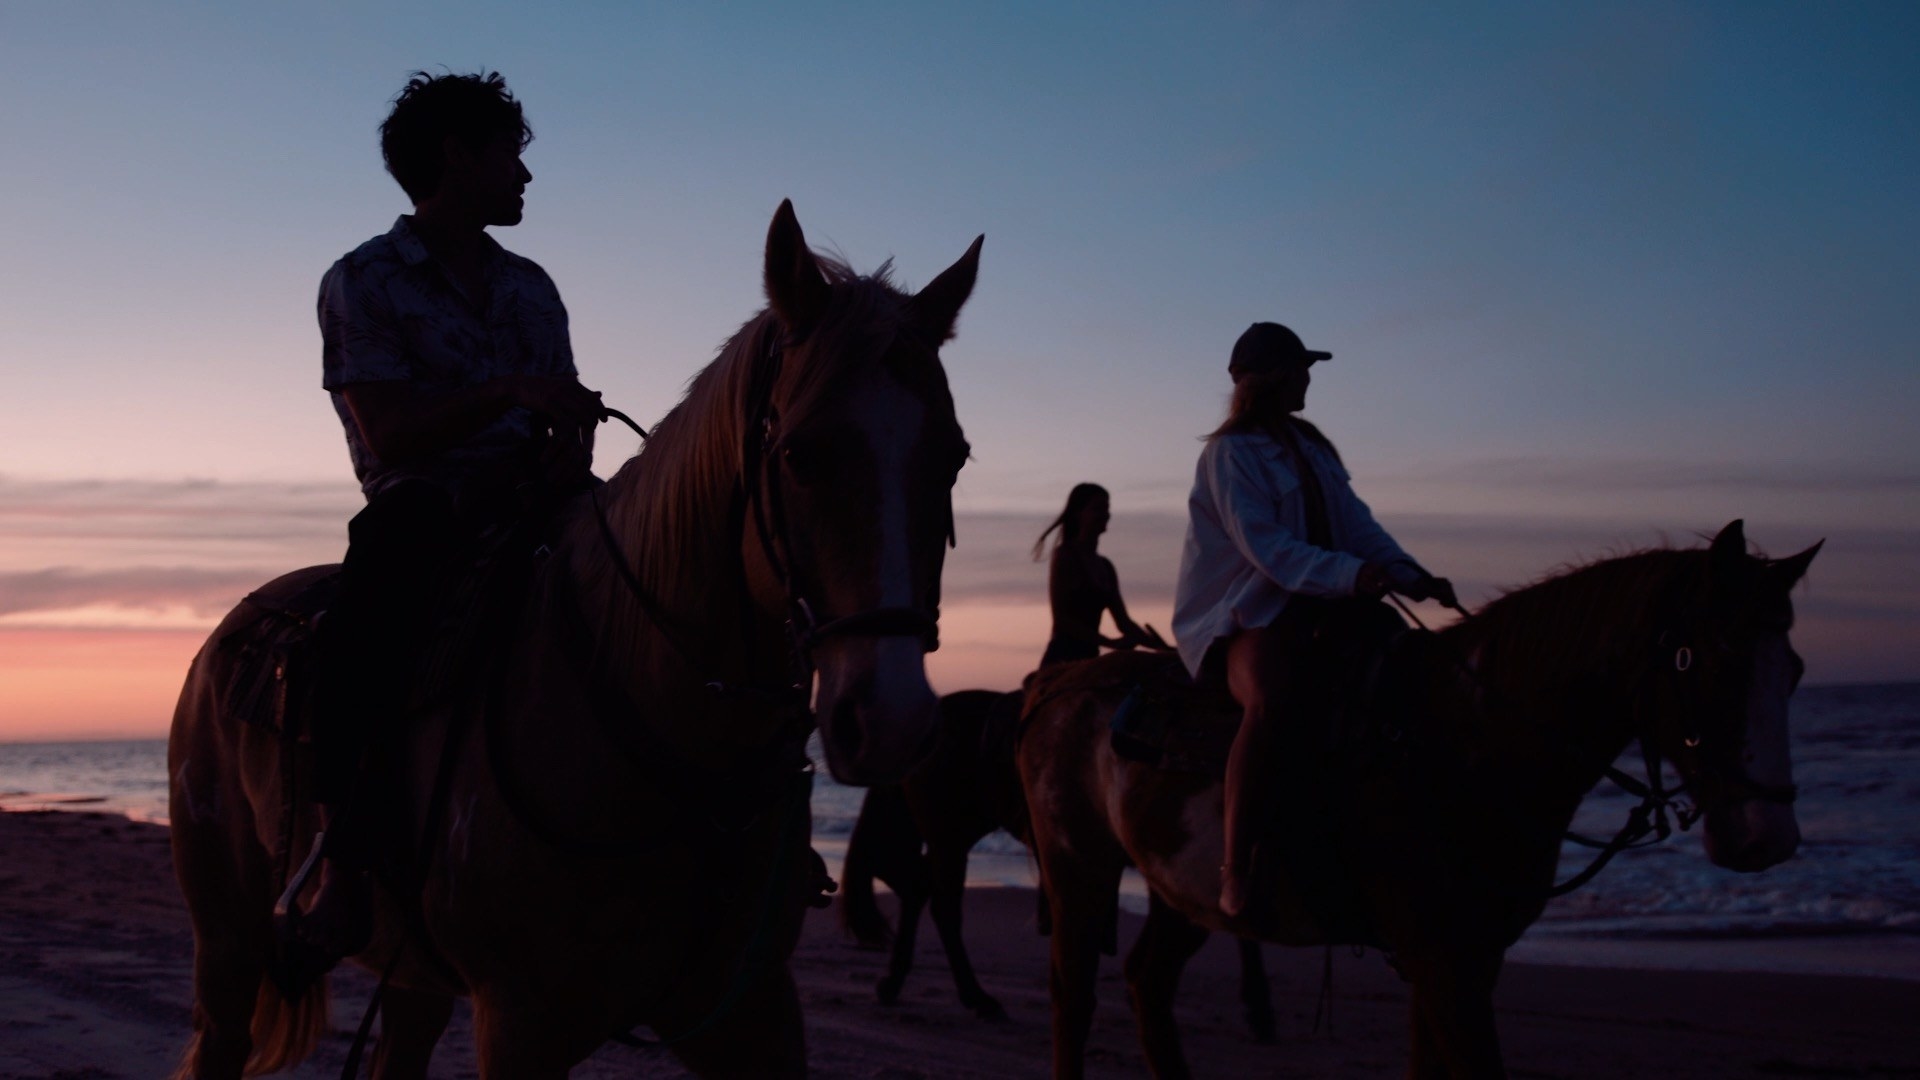 Three young people riding horses by the beach at sunset